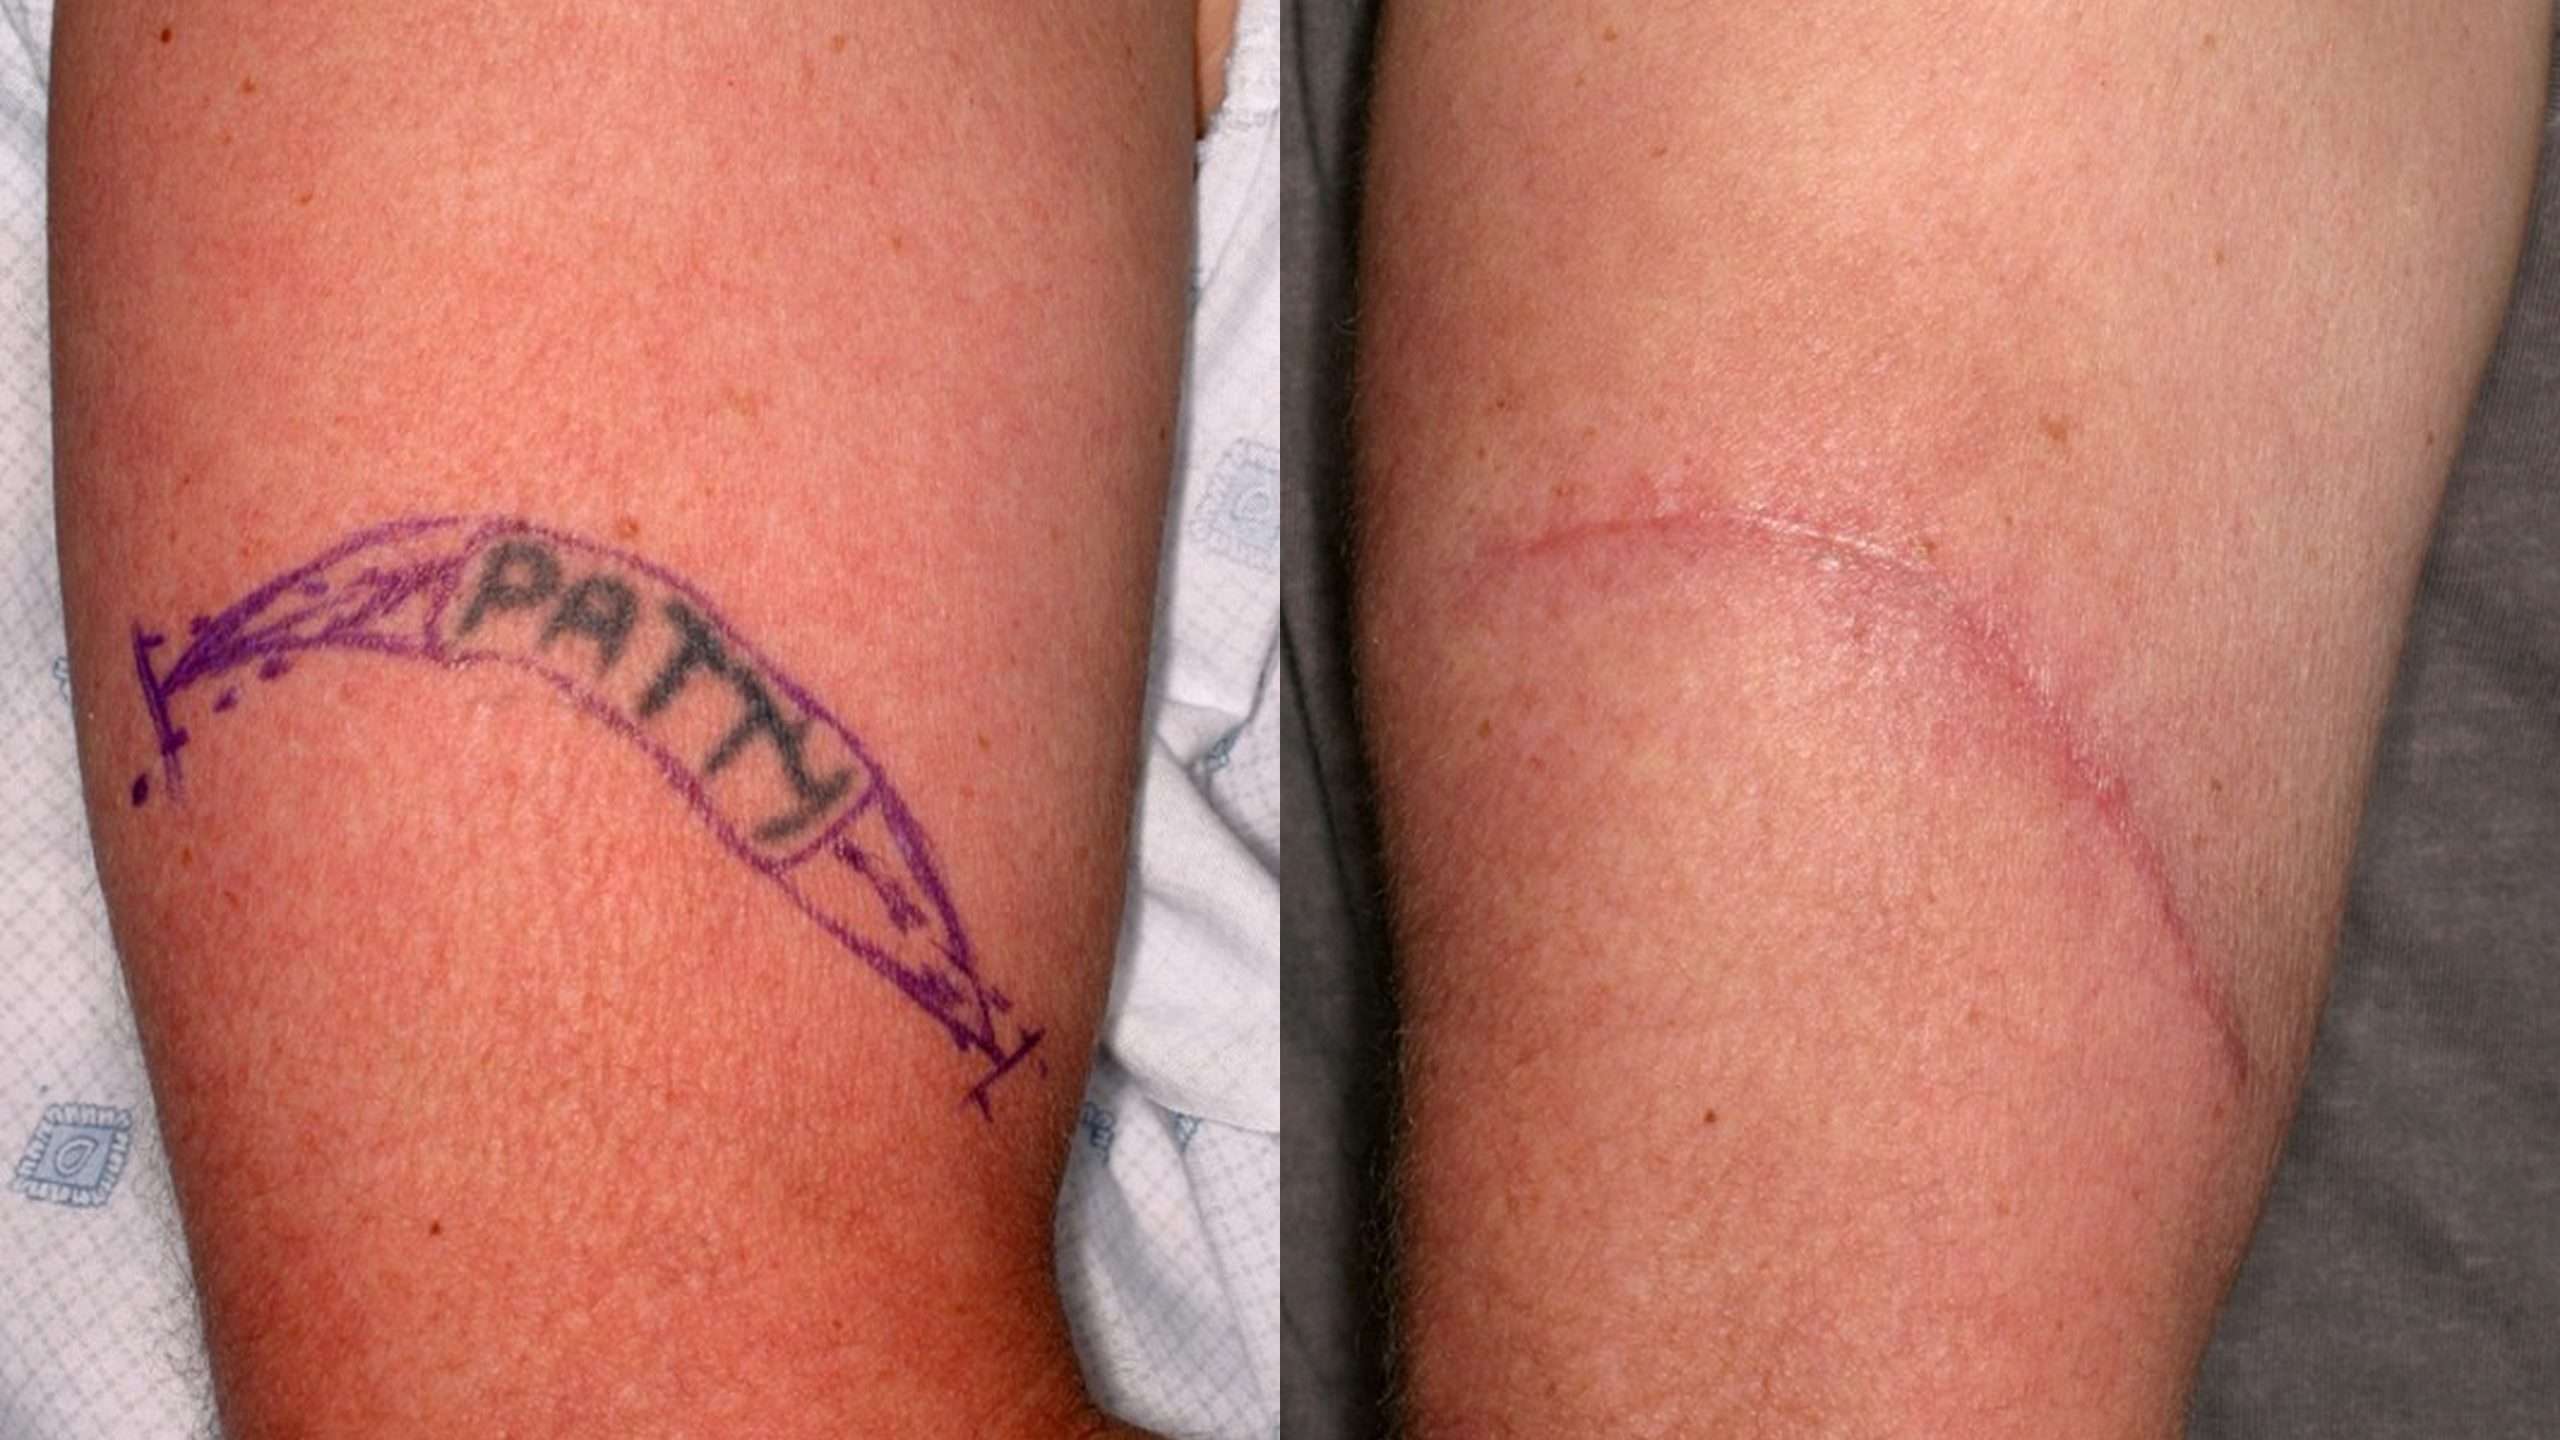 LASER Tattoo Removal, Tattoo Surgery and other methods ...